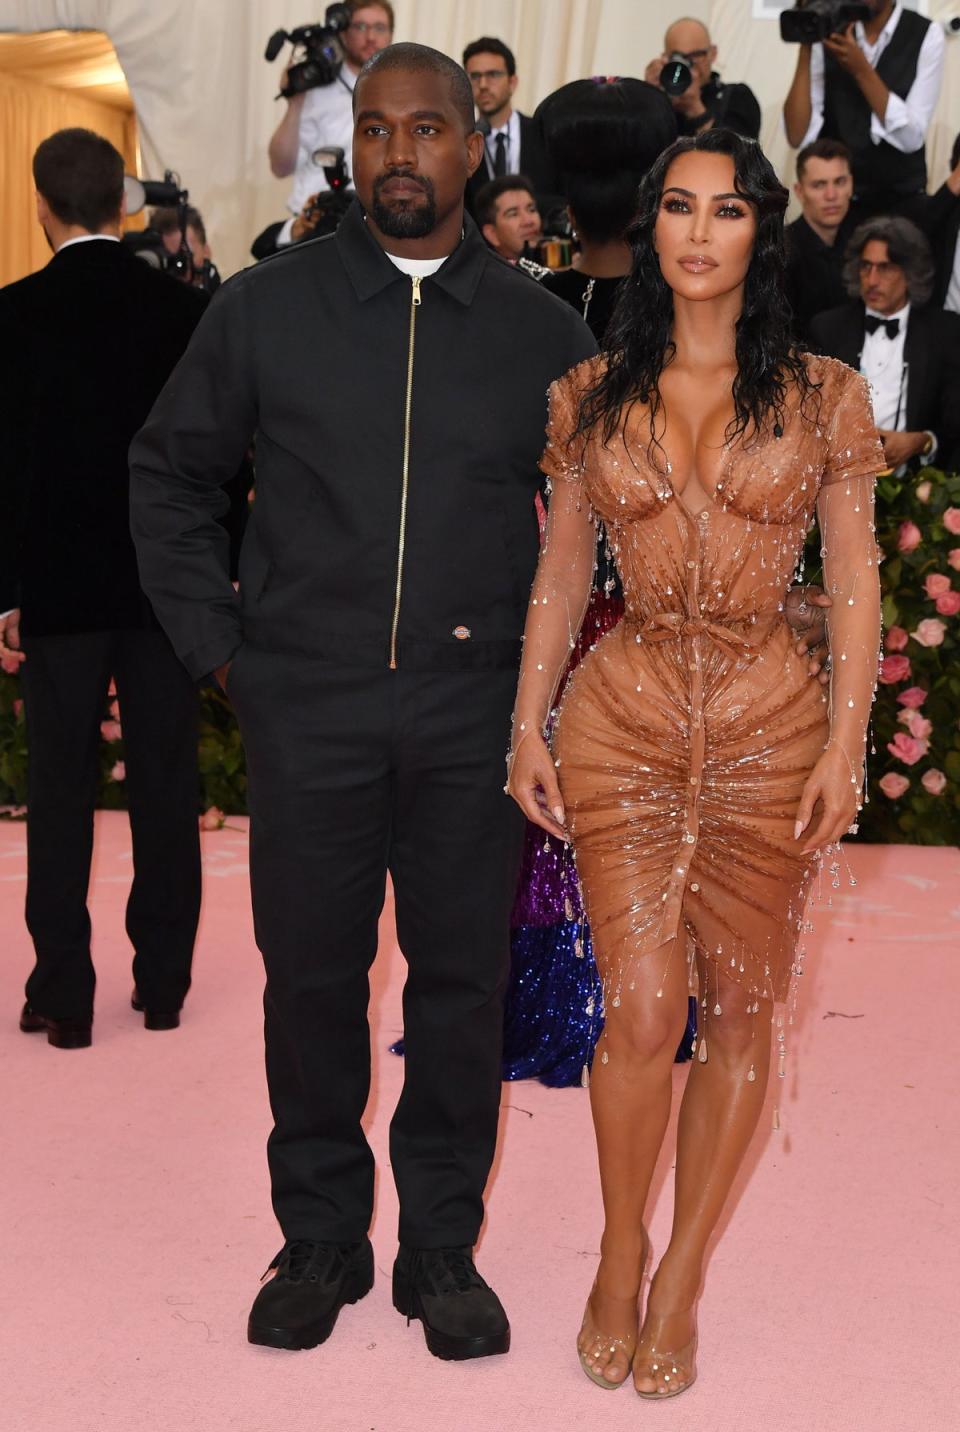 West and the SKIMS founder at 2019’s Met Gala (AFP via Getty Images)